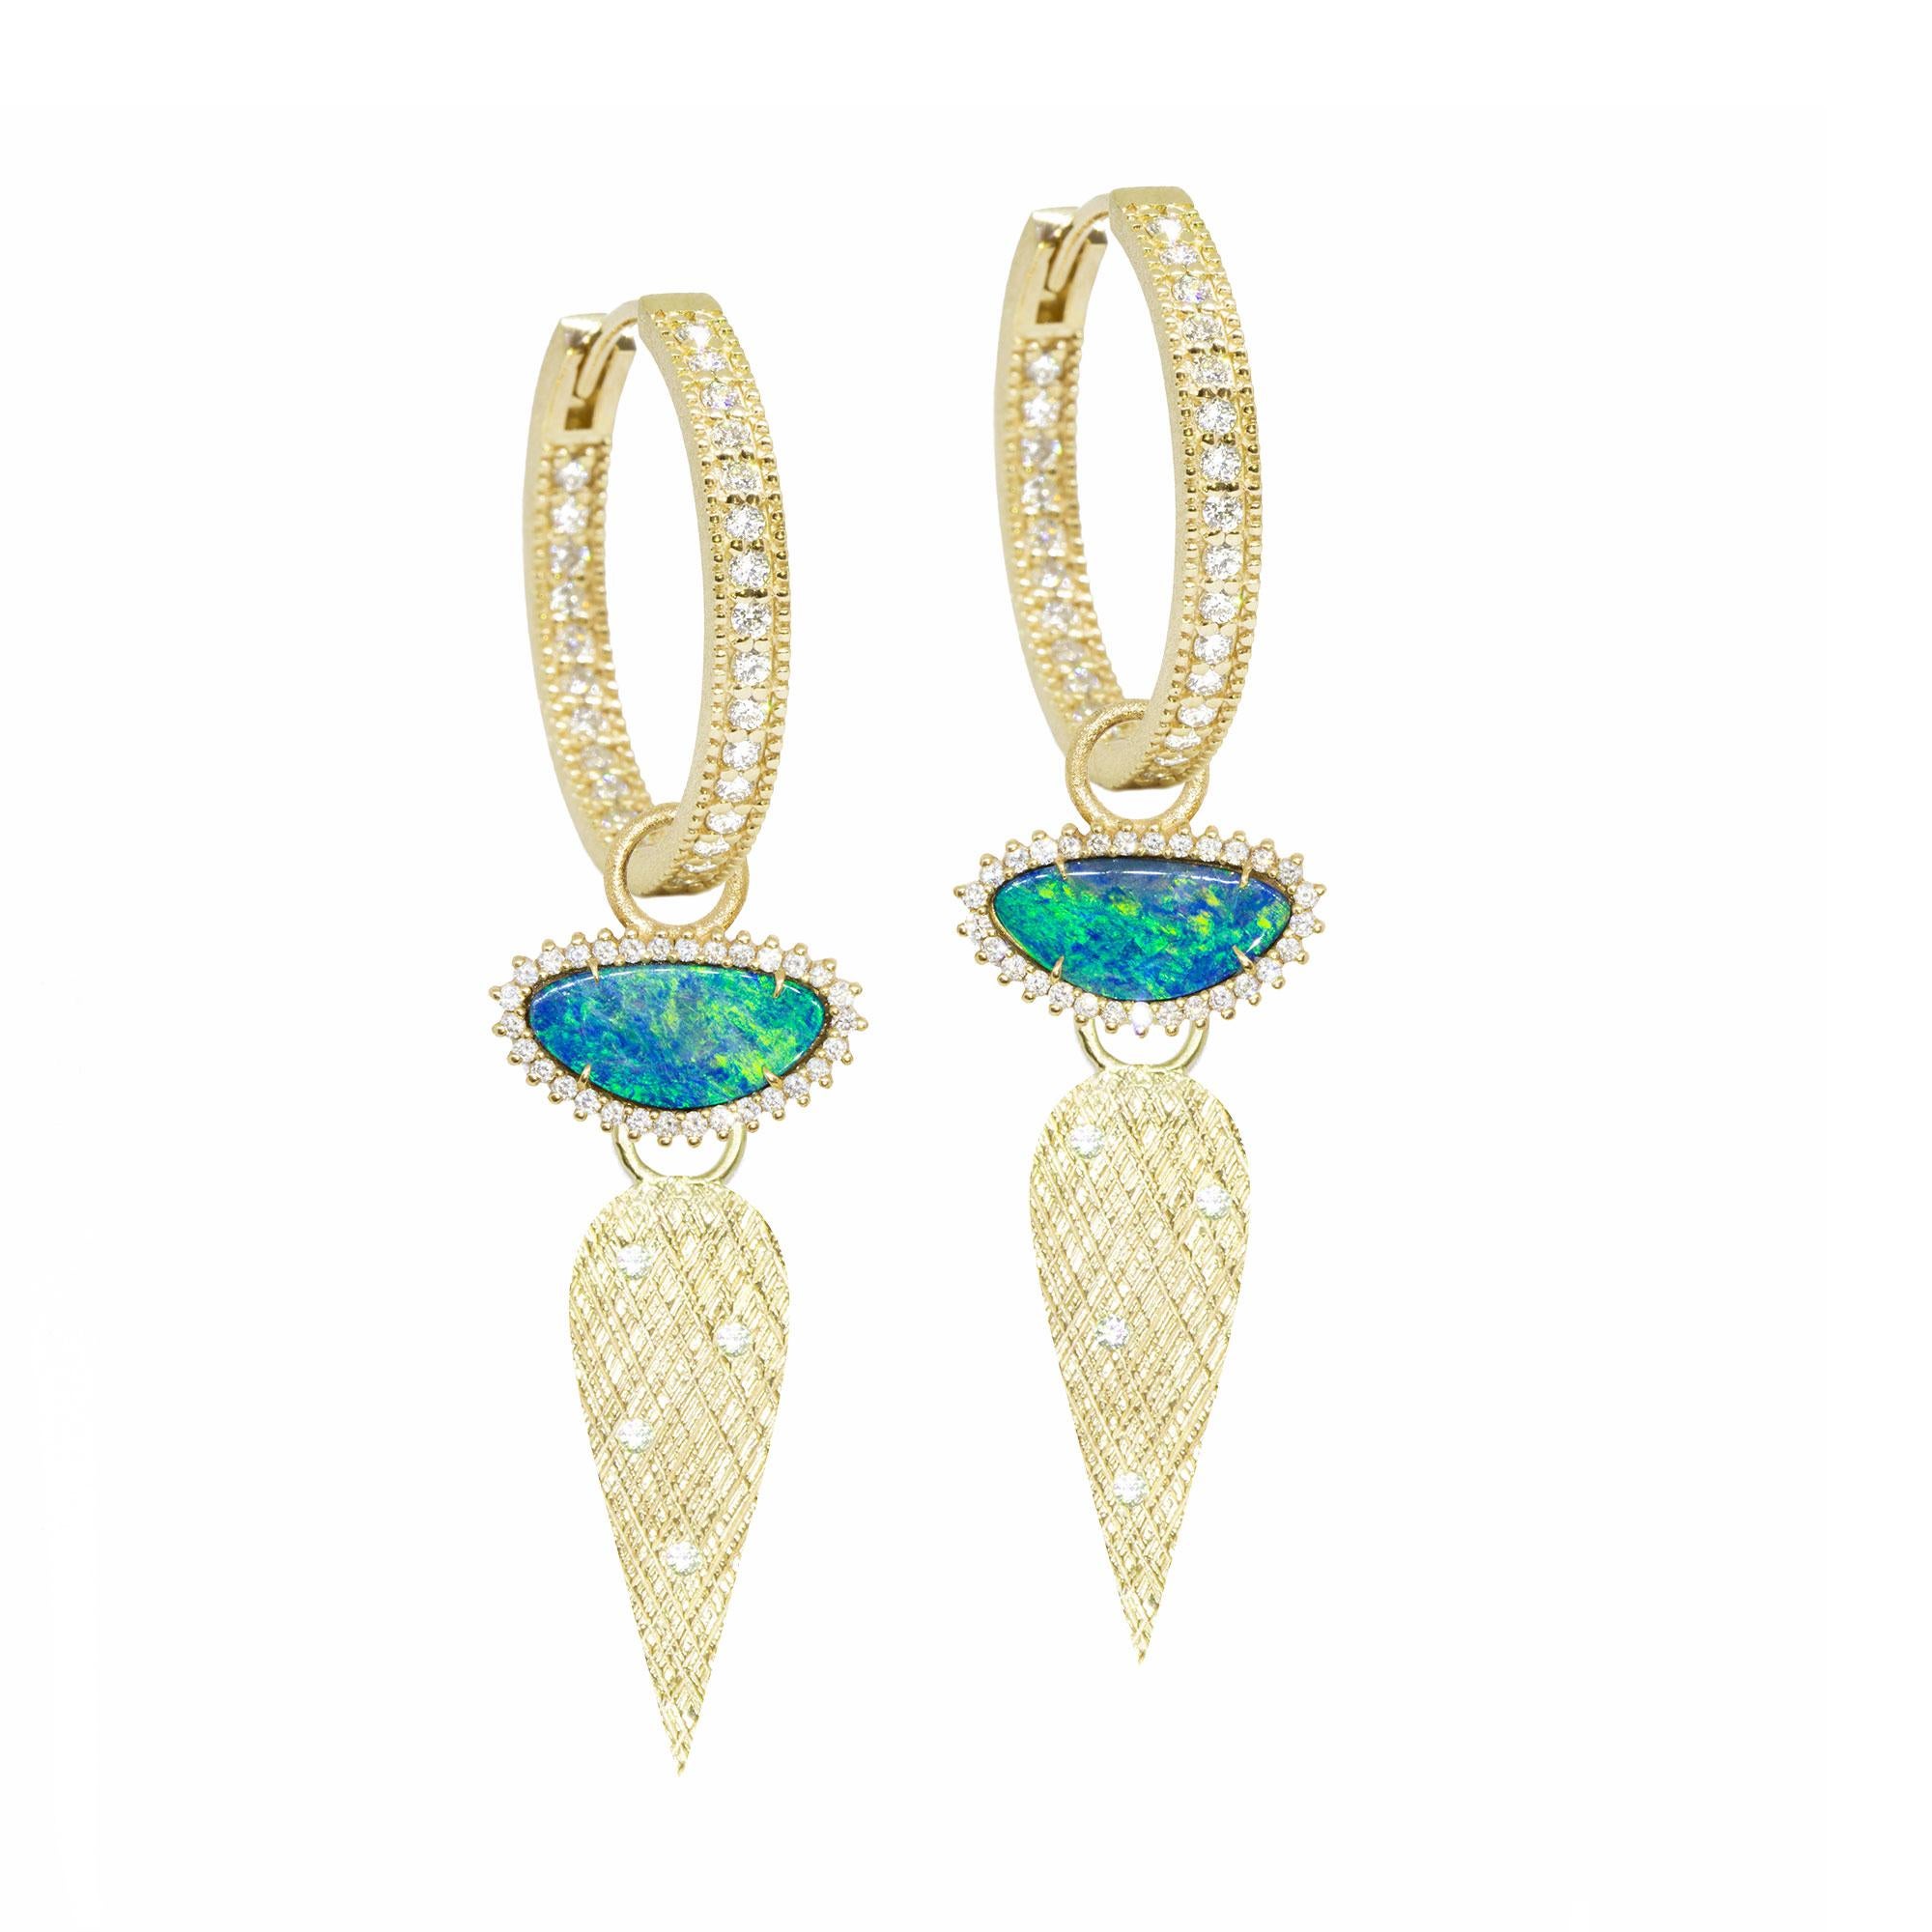 The perfect everyday style, especially when you want a subtle pop of color, the Angel Wings 20mm Gold Charms scatter diamonds on a rich gold background detailed with a feather-like crosshatch pattern. Add a touch of color with doublet opal diamond